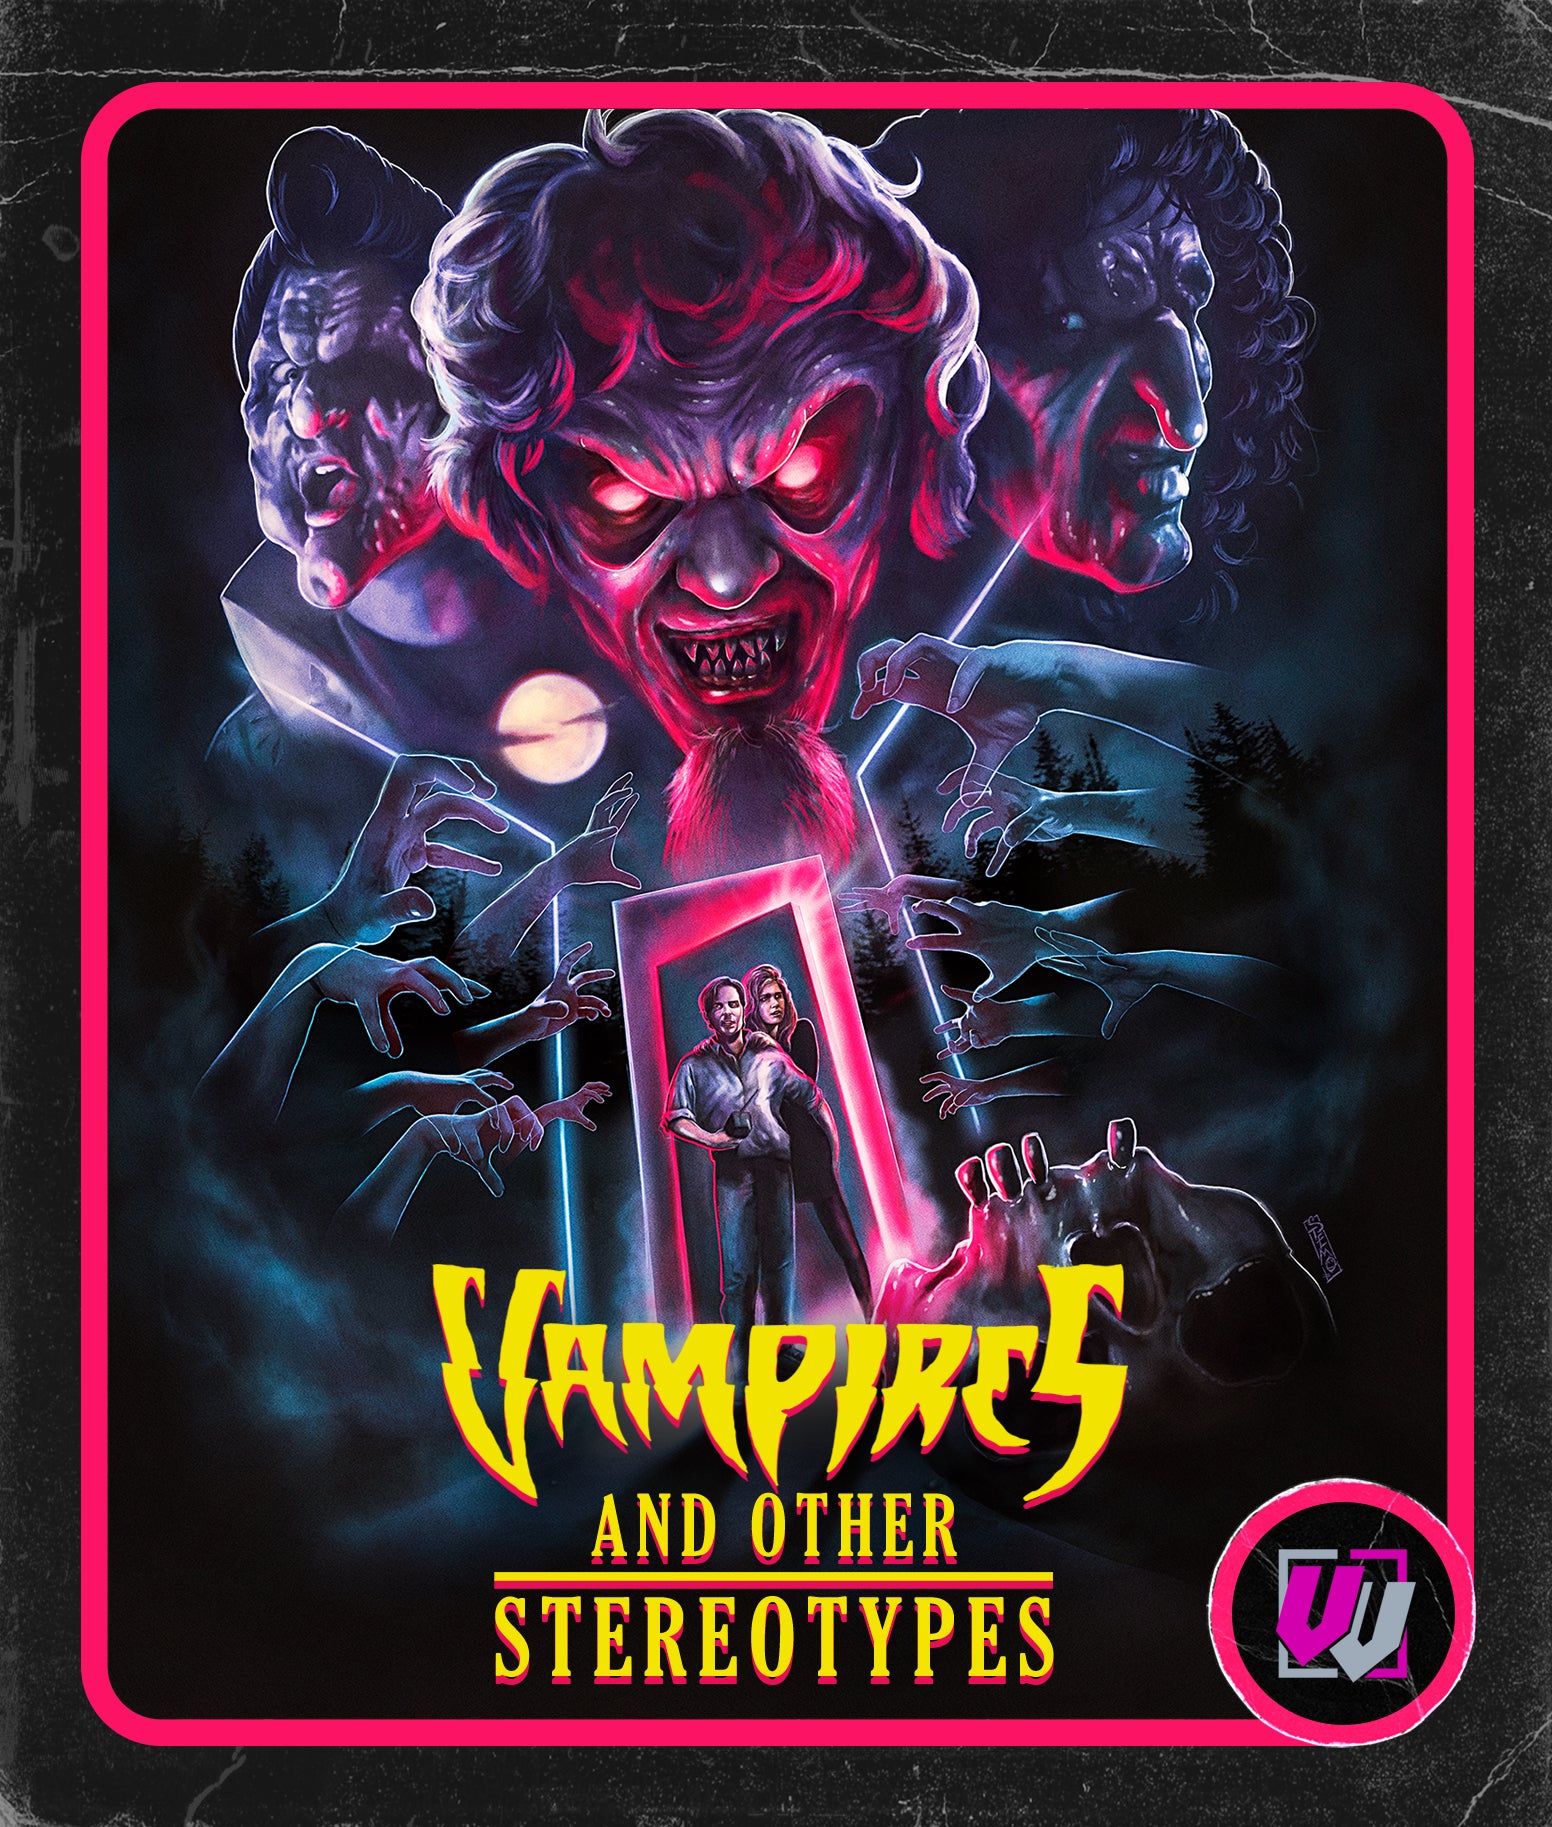 VAMPIRES AND OTHER STEREOTYPES (LIMITED EDITION) BLU-RAY